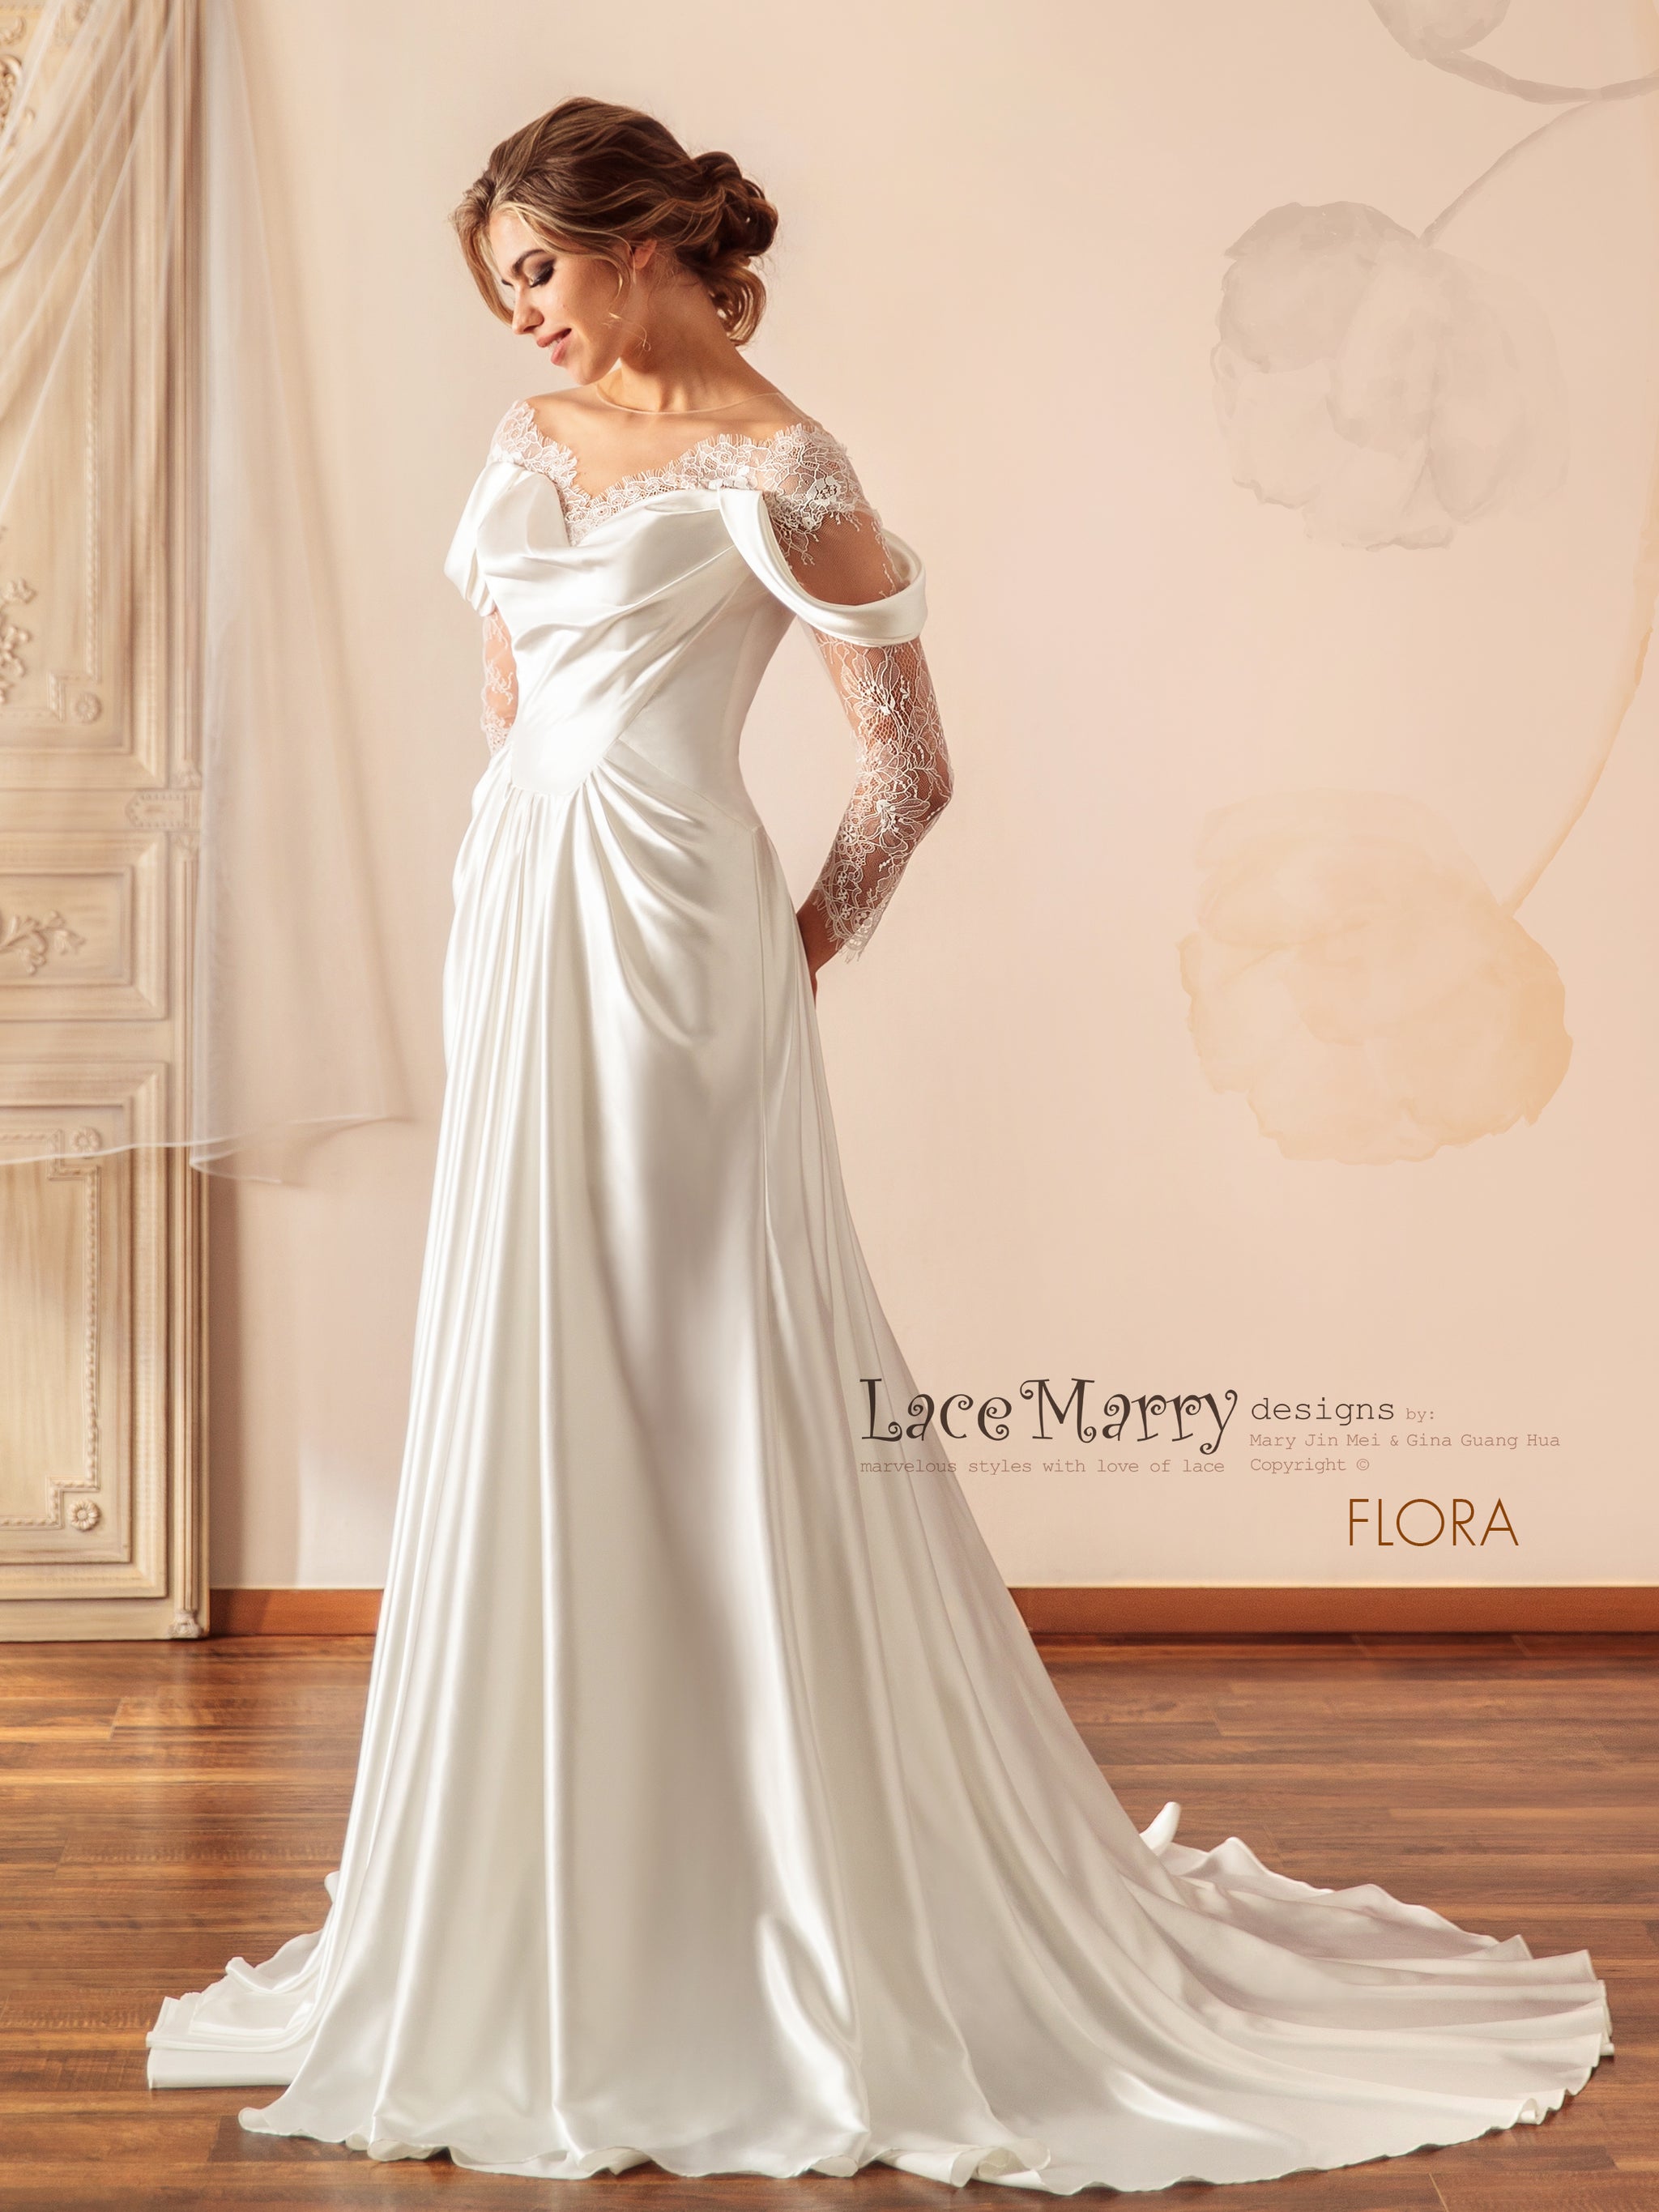 Off-Shoulder Lace Wedding Dress with Long Sleeves - LaceMarry